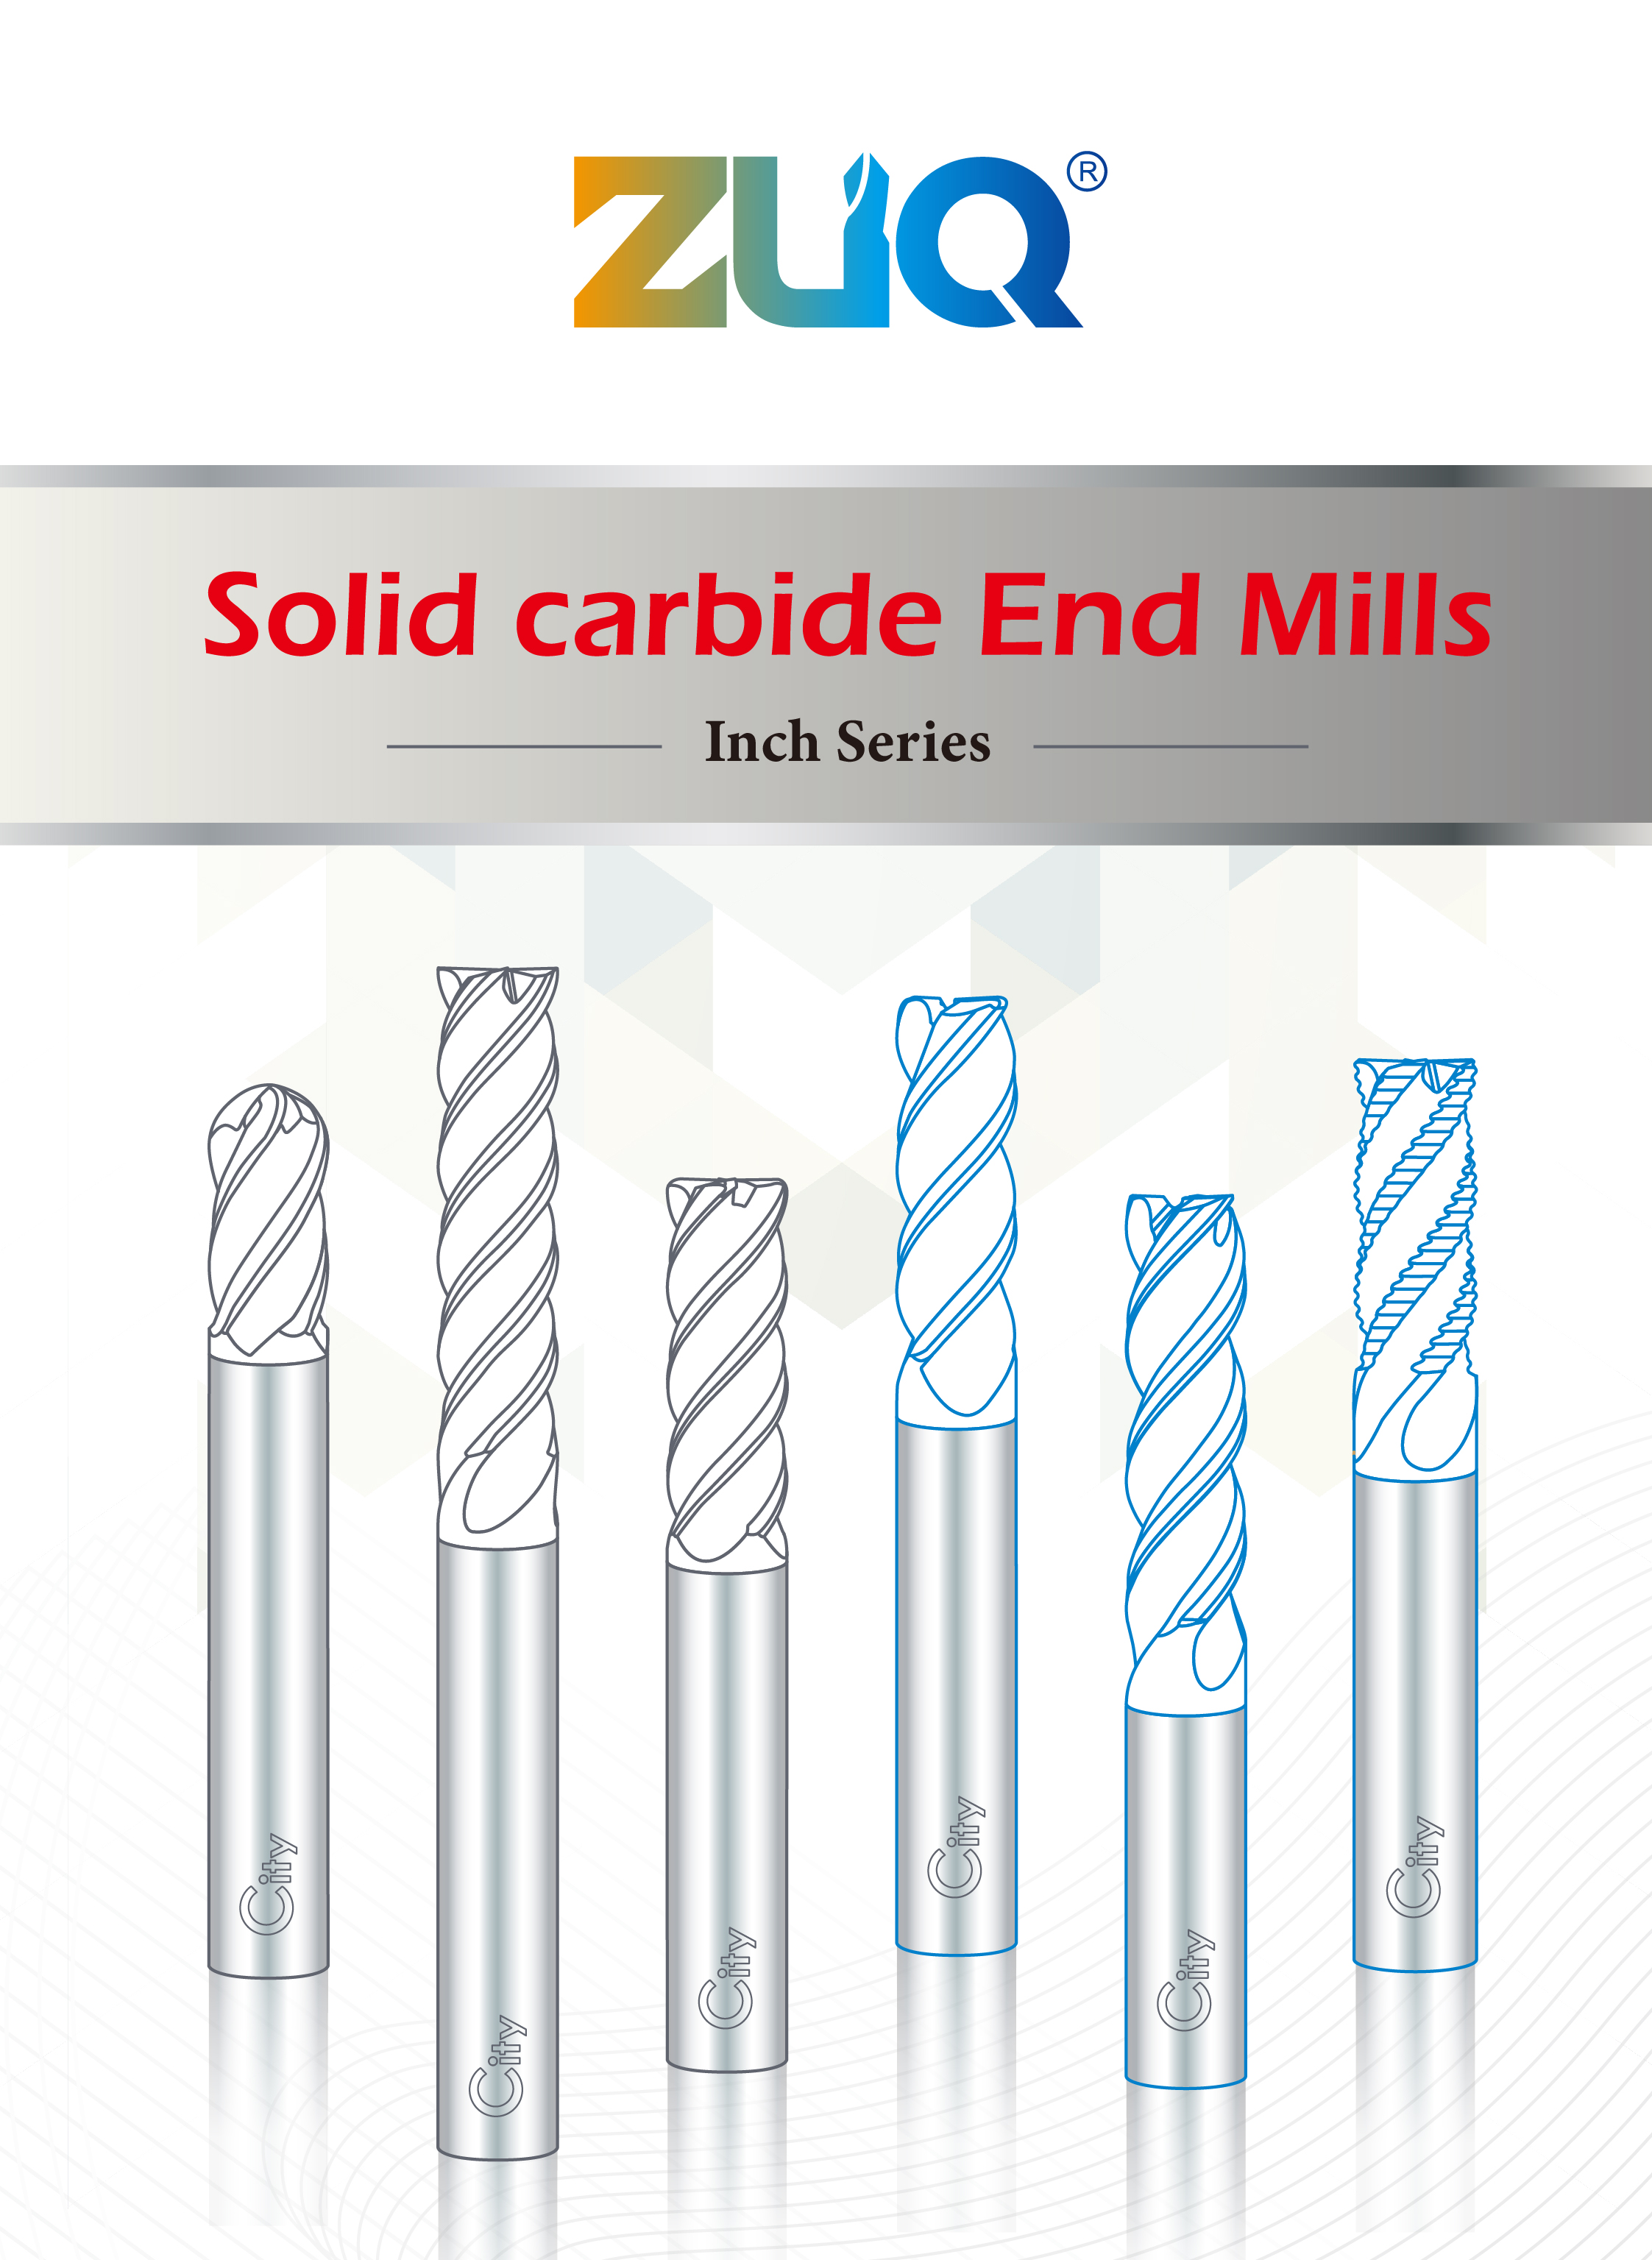 Solid Carbide End Mills - Inch Series